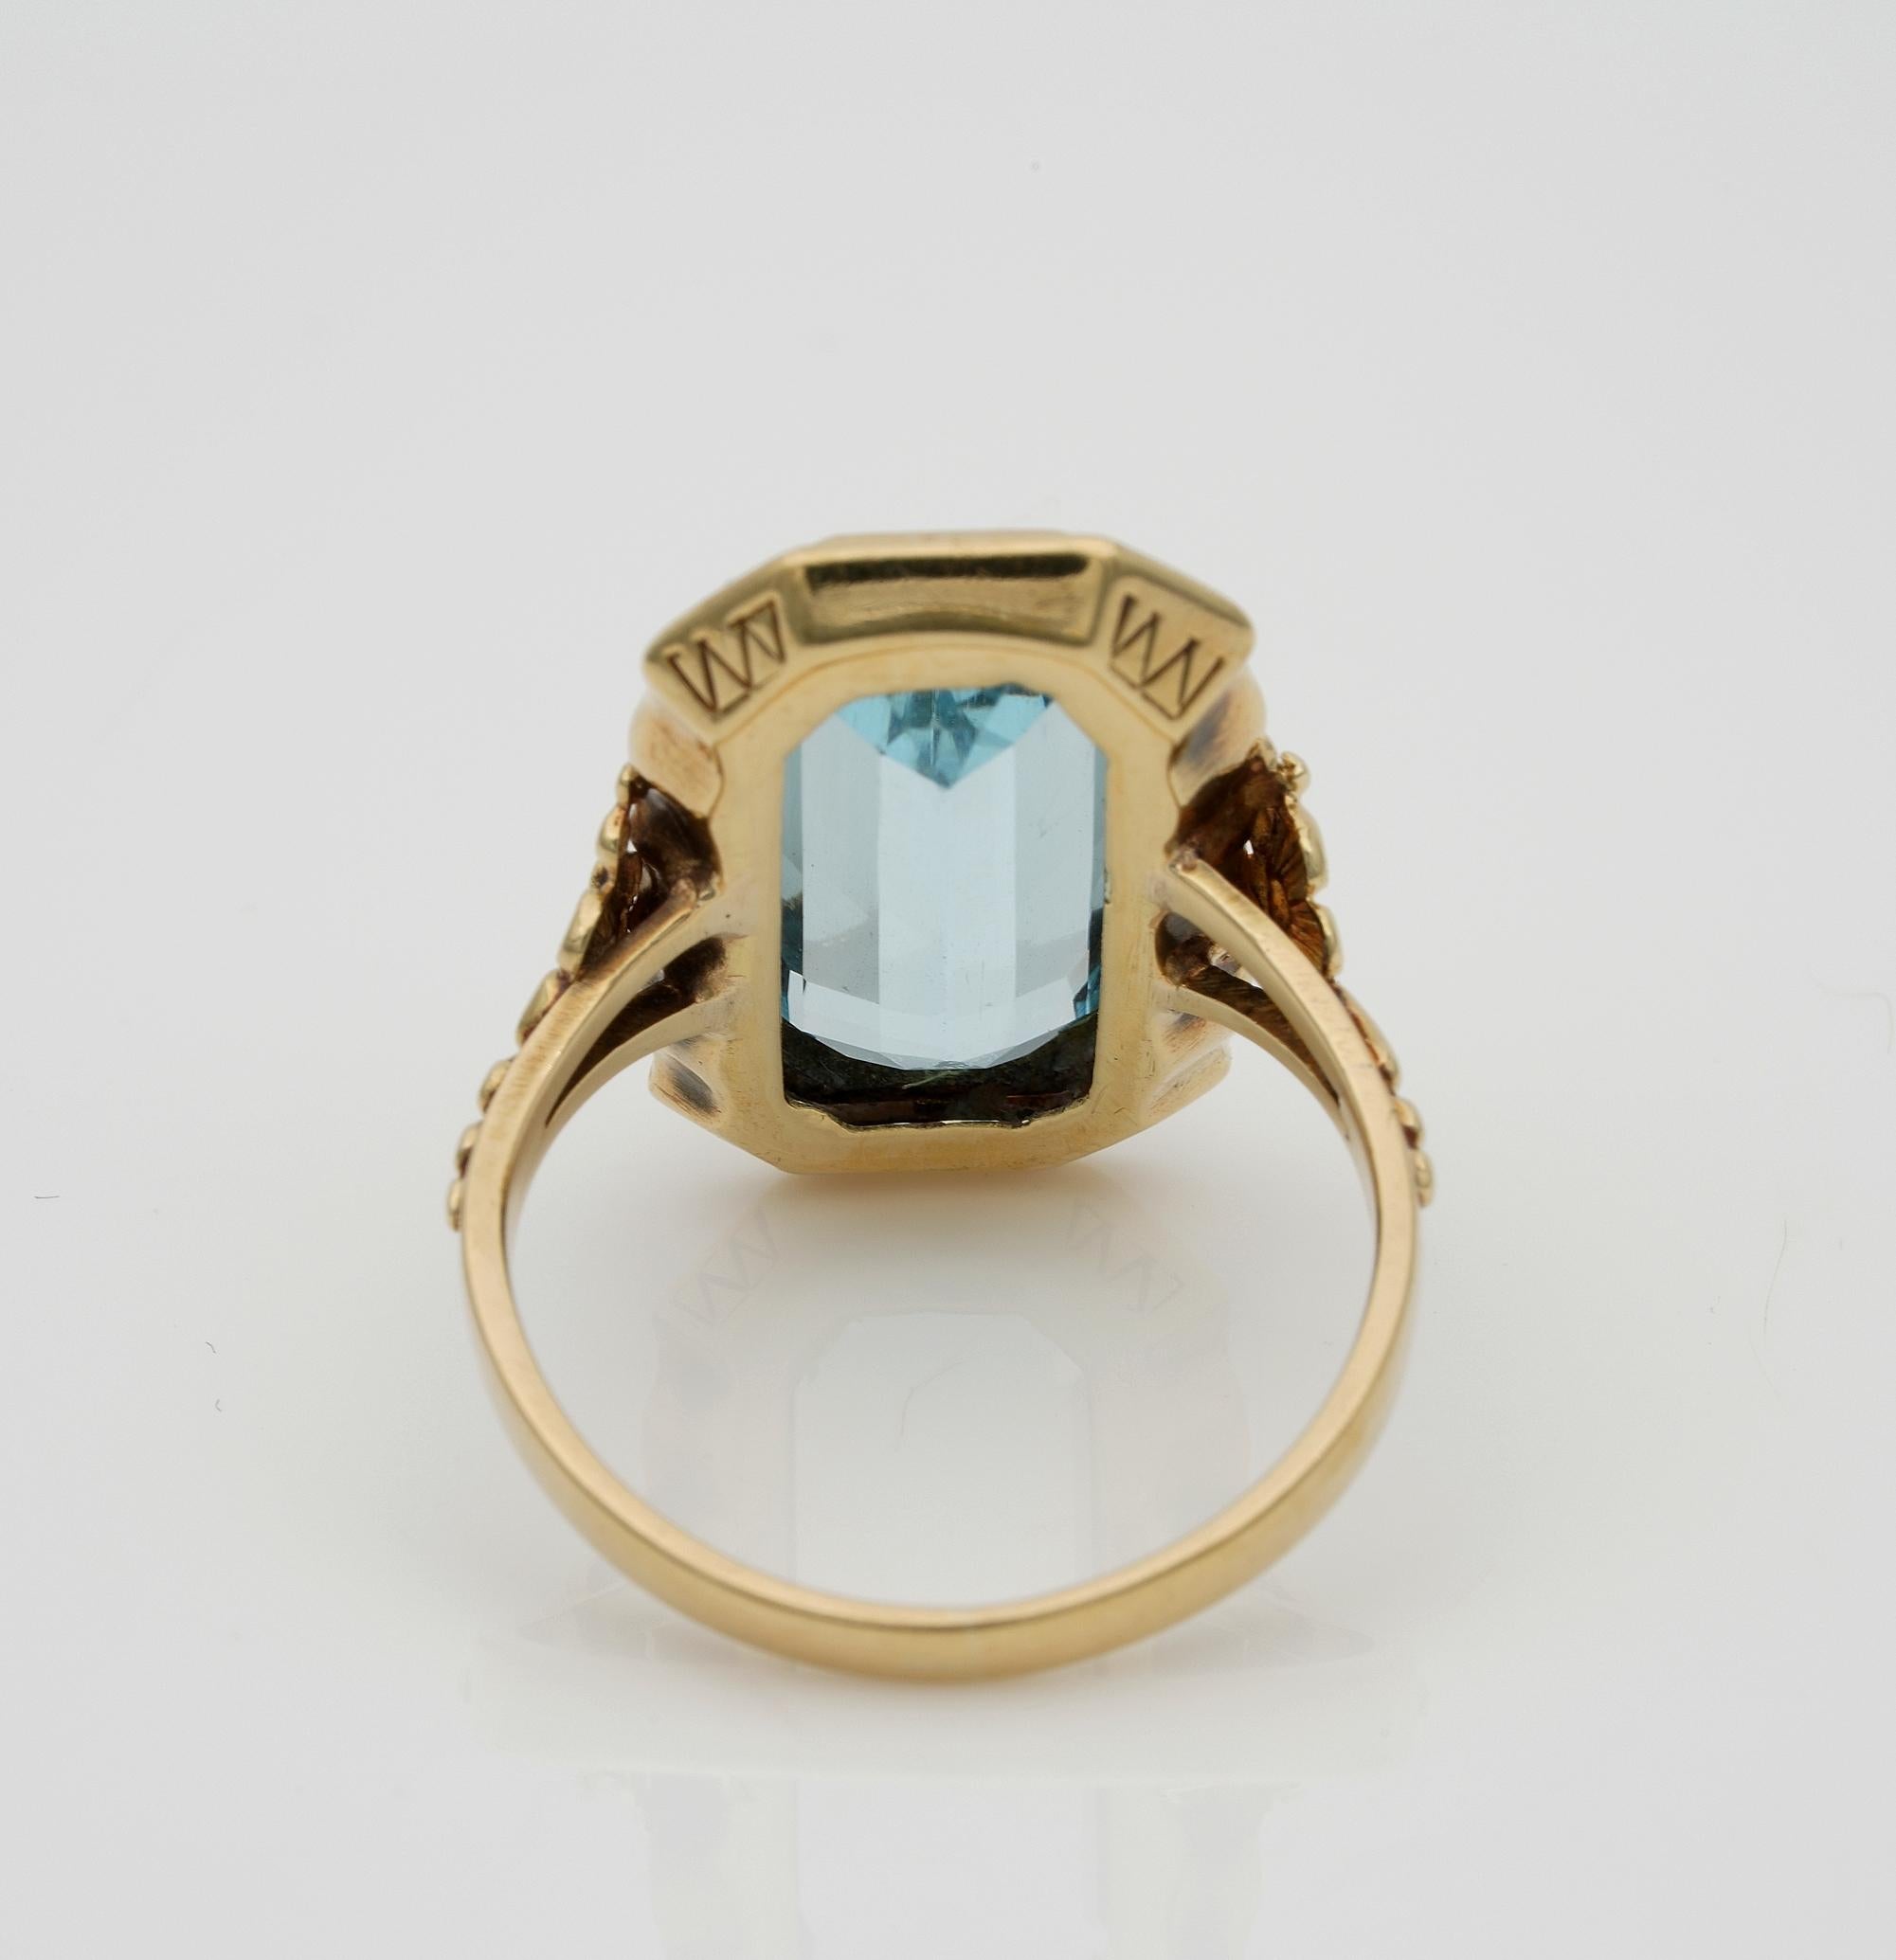 Edwardian 4.50 Carat Natural Untreated Emerald Cut Aquamarine Solitaire Ring For Sale 3